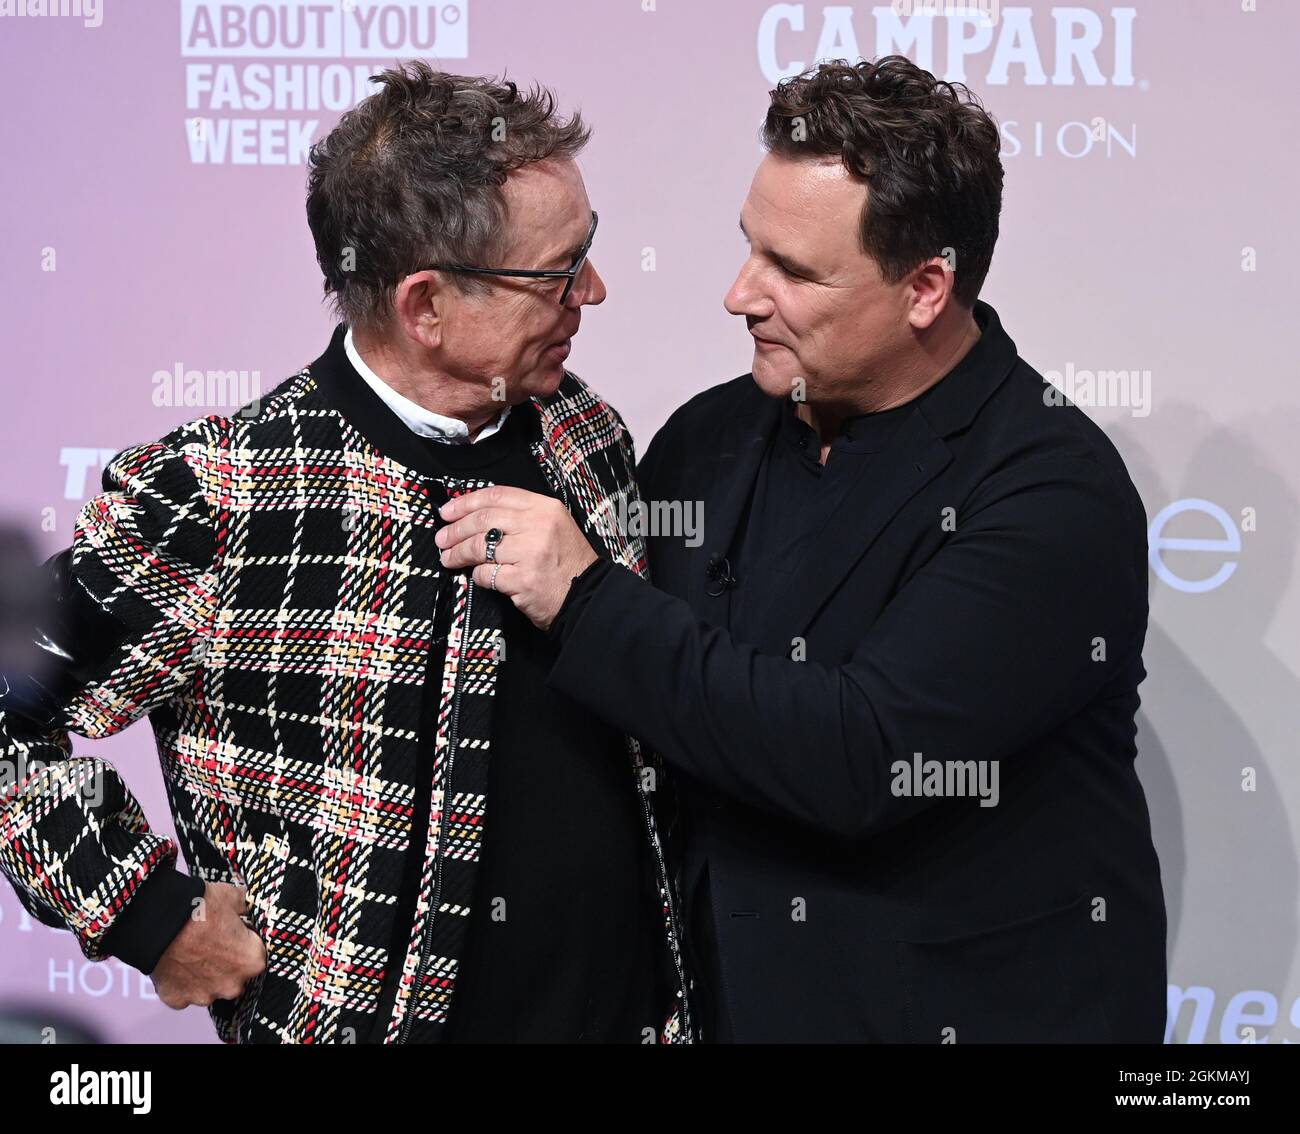 Berlin, Germany. 14th Sep, 2021. Frank Mutters (l) and his husband Guido Maria Kretschmer arrive at the Kraftwerk for Guido Maria Kretschmer's fashion show as part of the About You Fashion Week. About You, or Re-Fashion Week, has been part of Berlin Fashion Week since 2021. About You Fashion Week runs from 11 to 15 September 2021. Credit: Jens Kalaene/dpa-Zentralbild/dpa/Alamy Live News Stock Photo